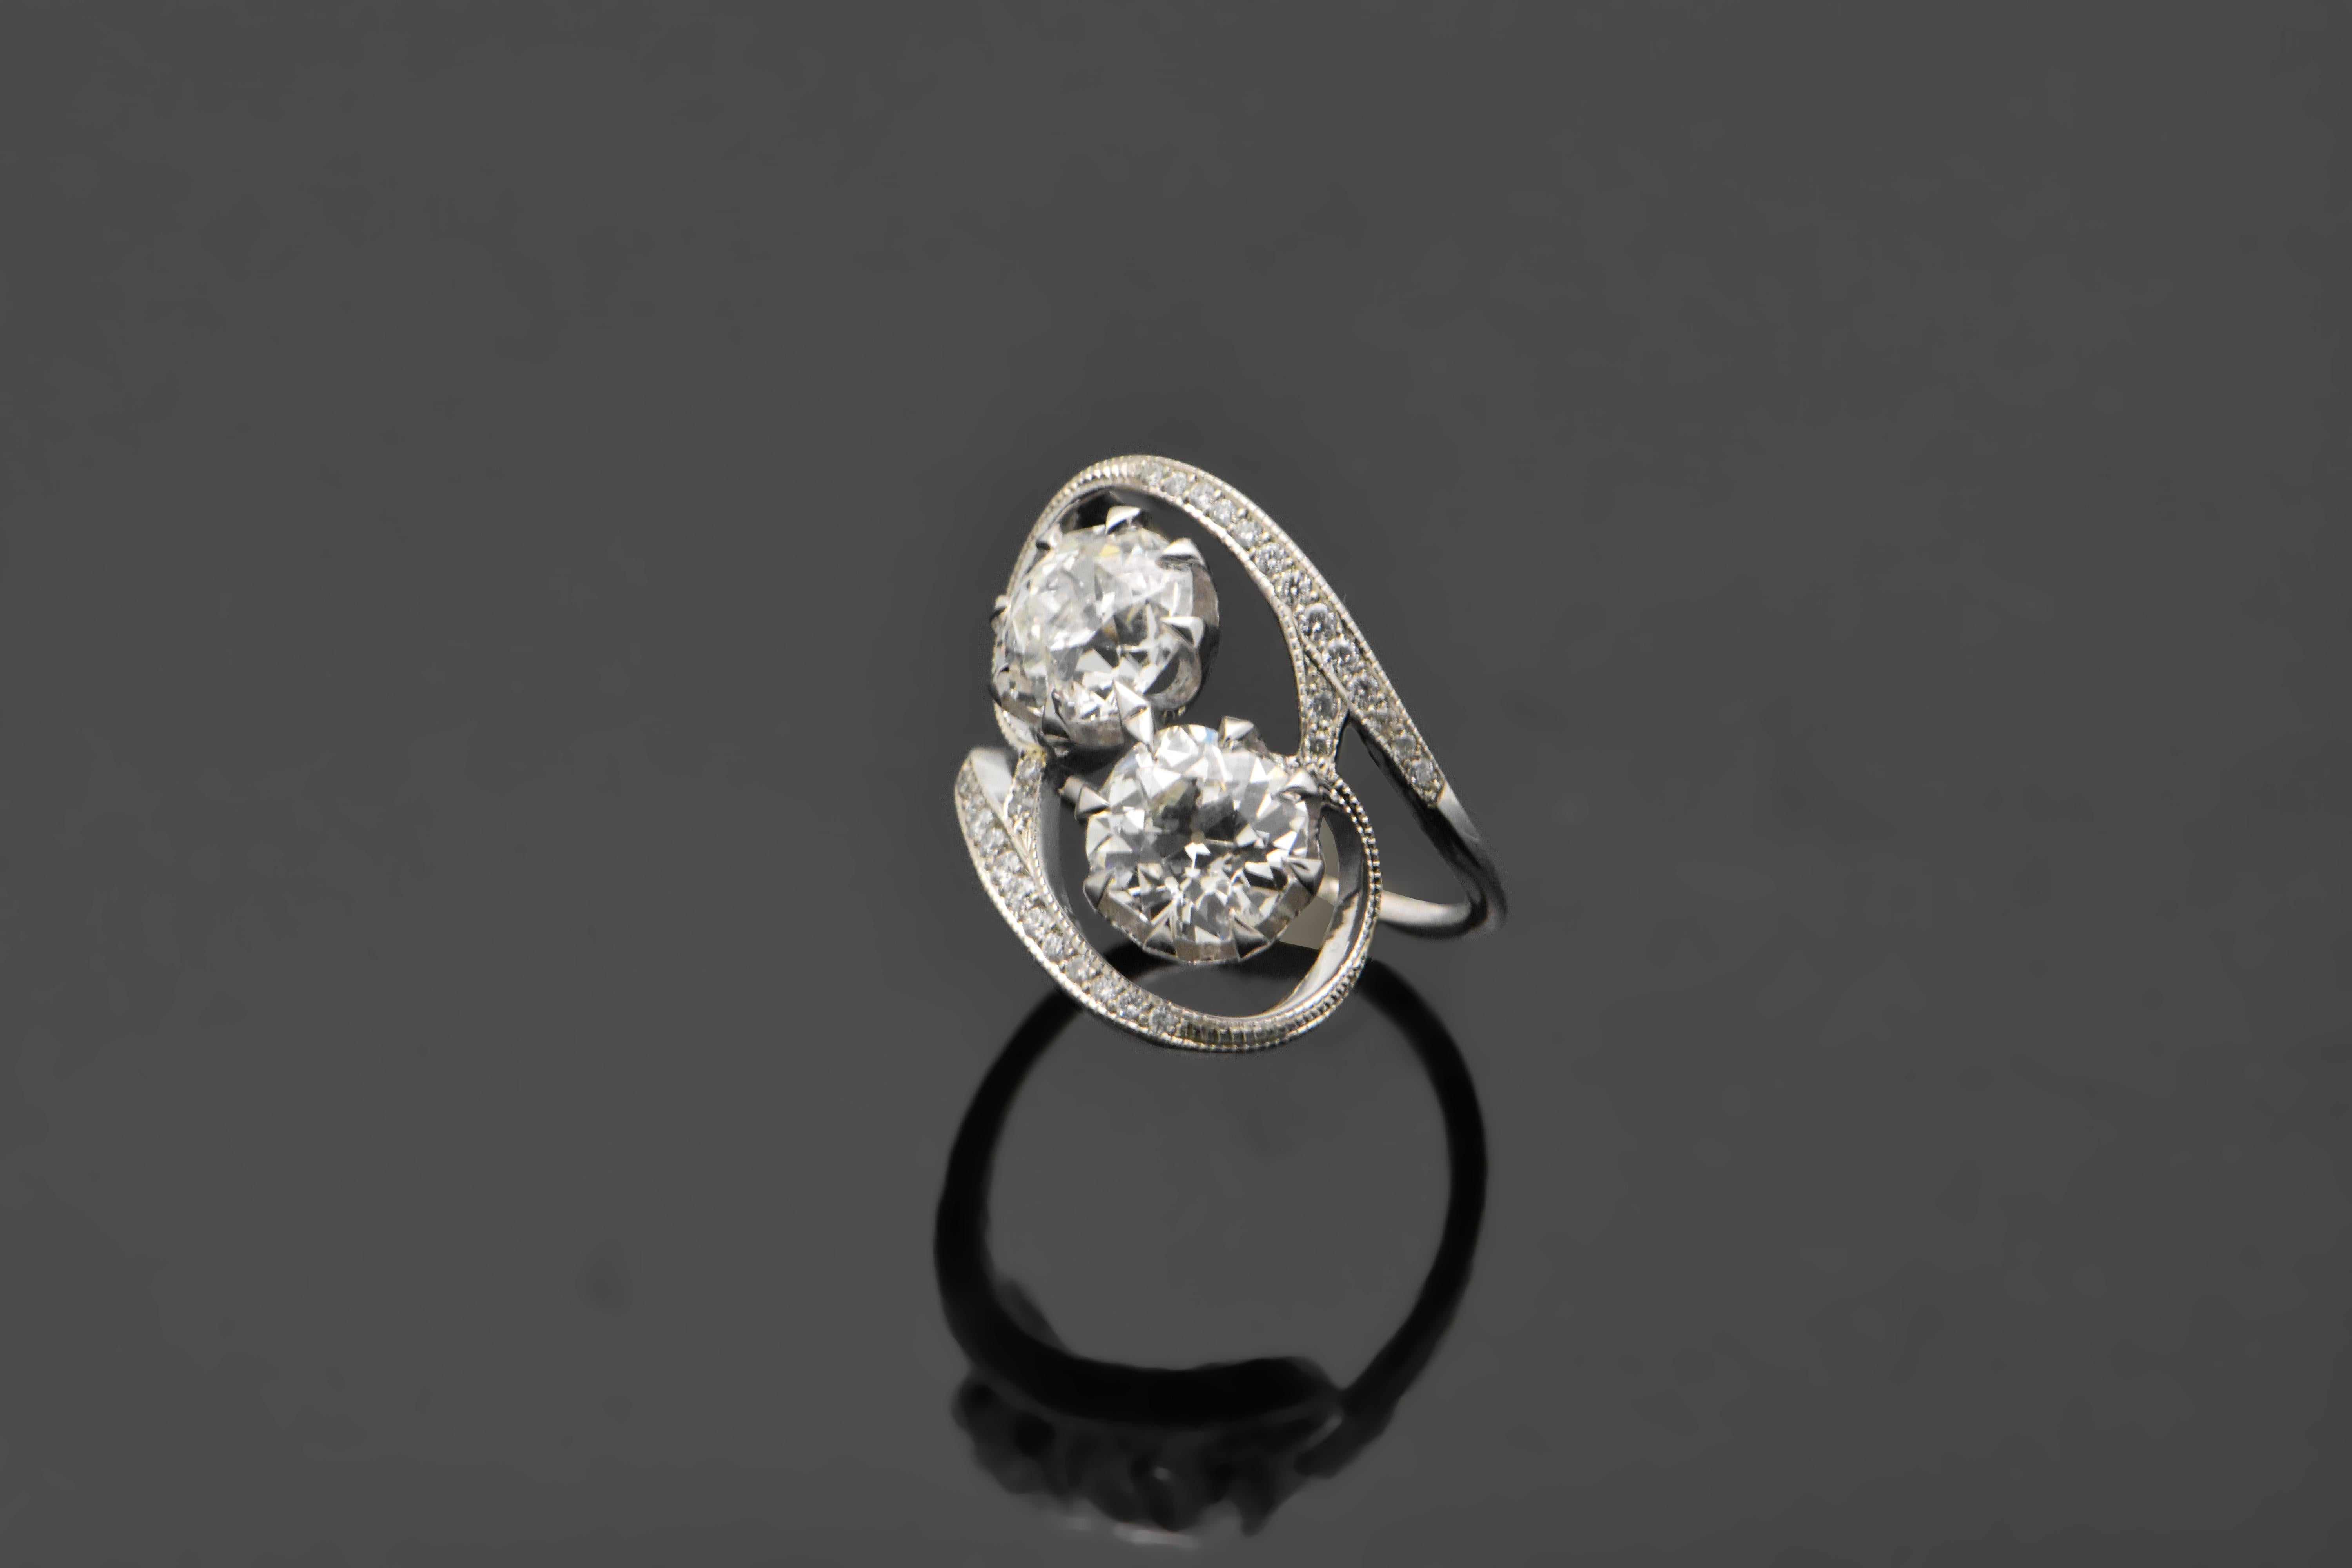 14kt White Gold Diamonds. This design features two large diamonds each set in 8 prongs surrounded by swooping  white gold band details lined with diamonds.

This item is a custom order only. Price is for the ring setting only. The stones will be